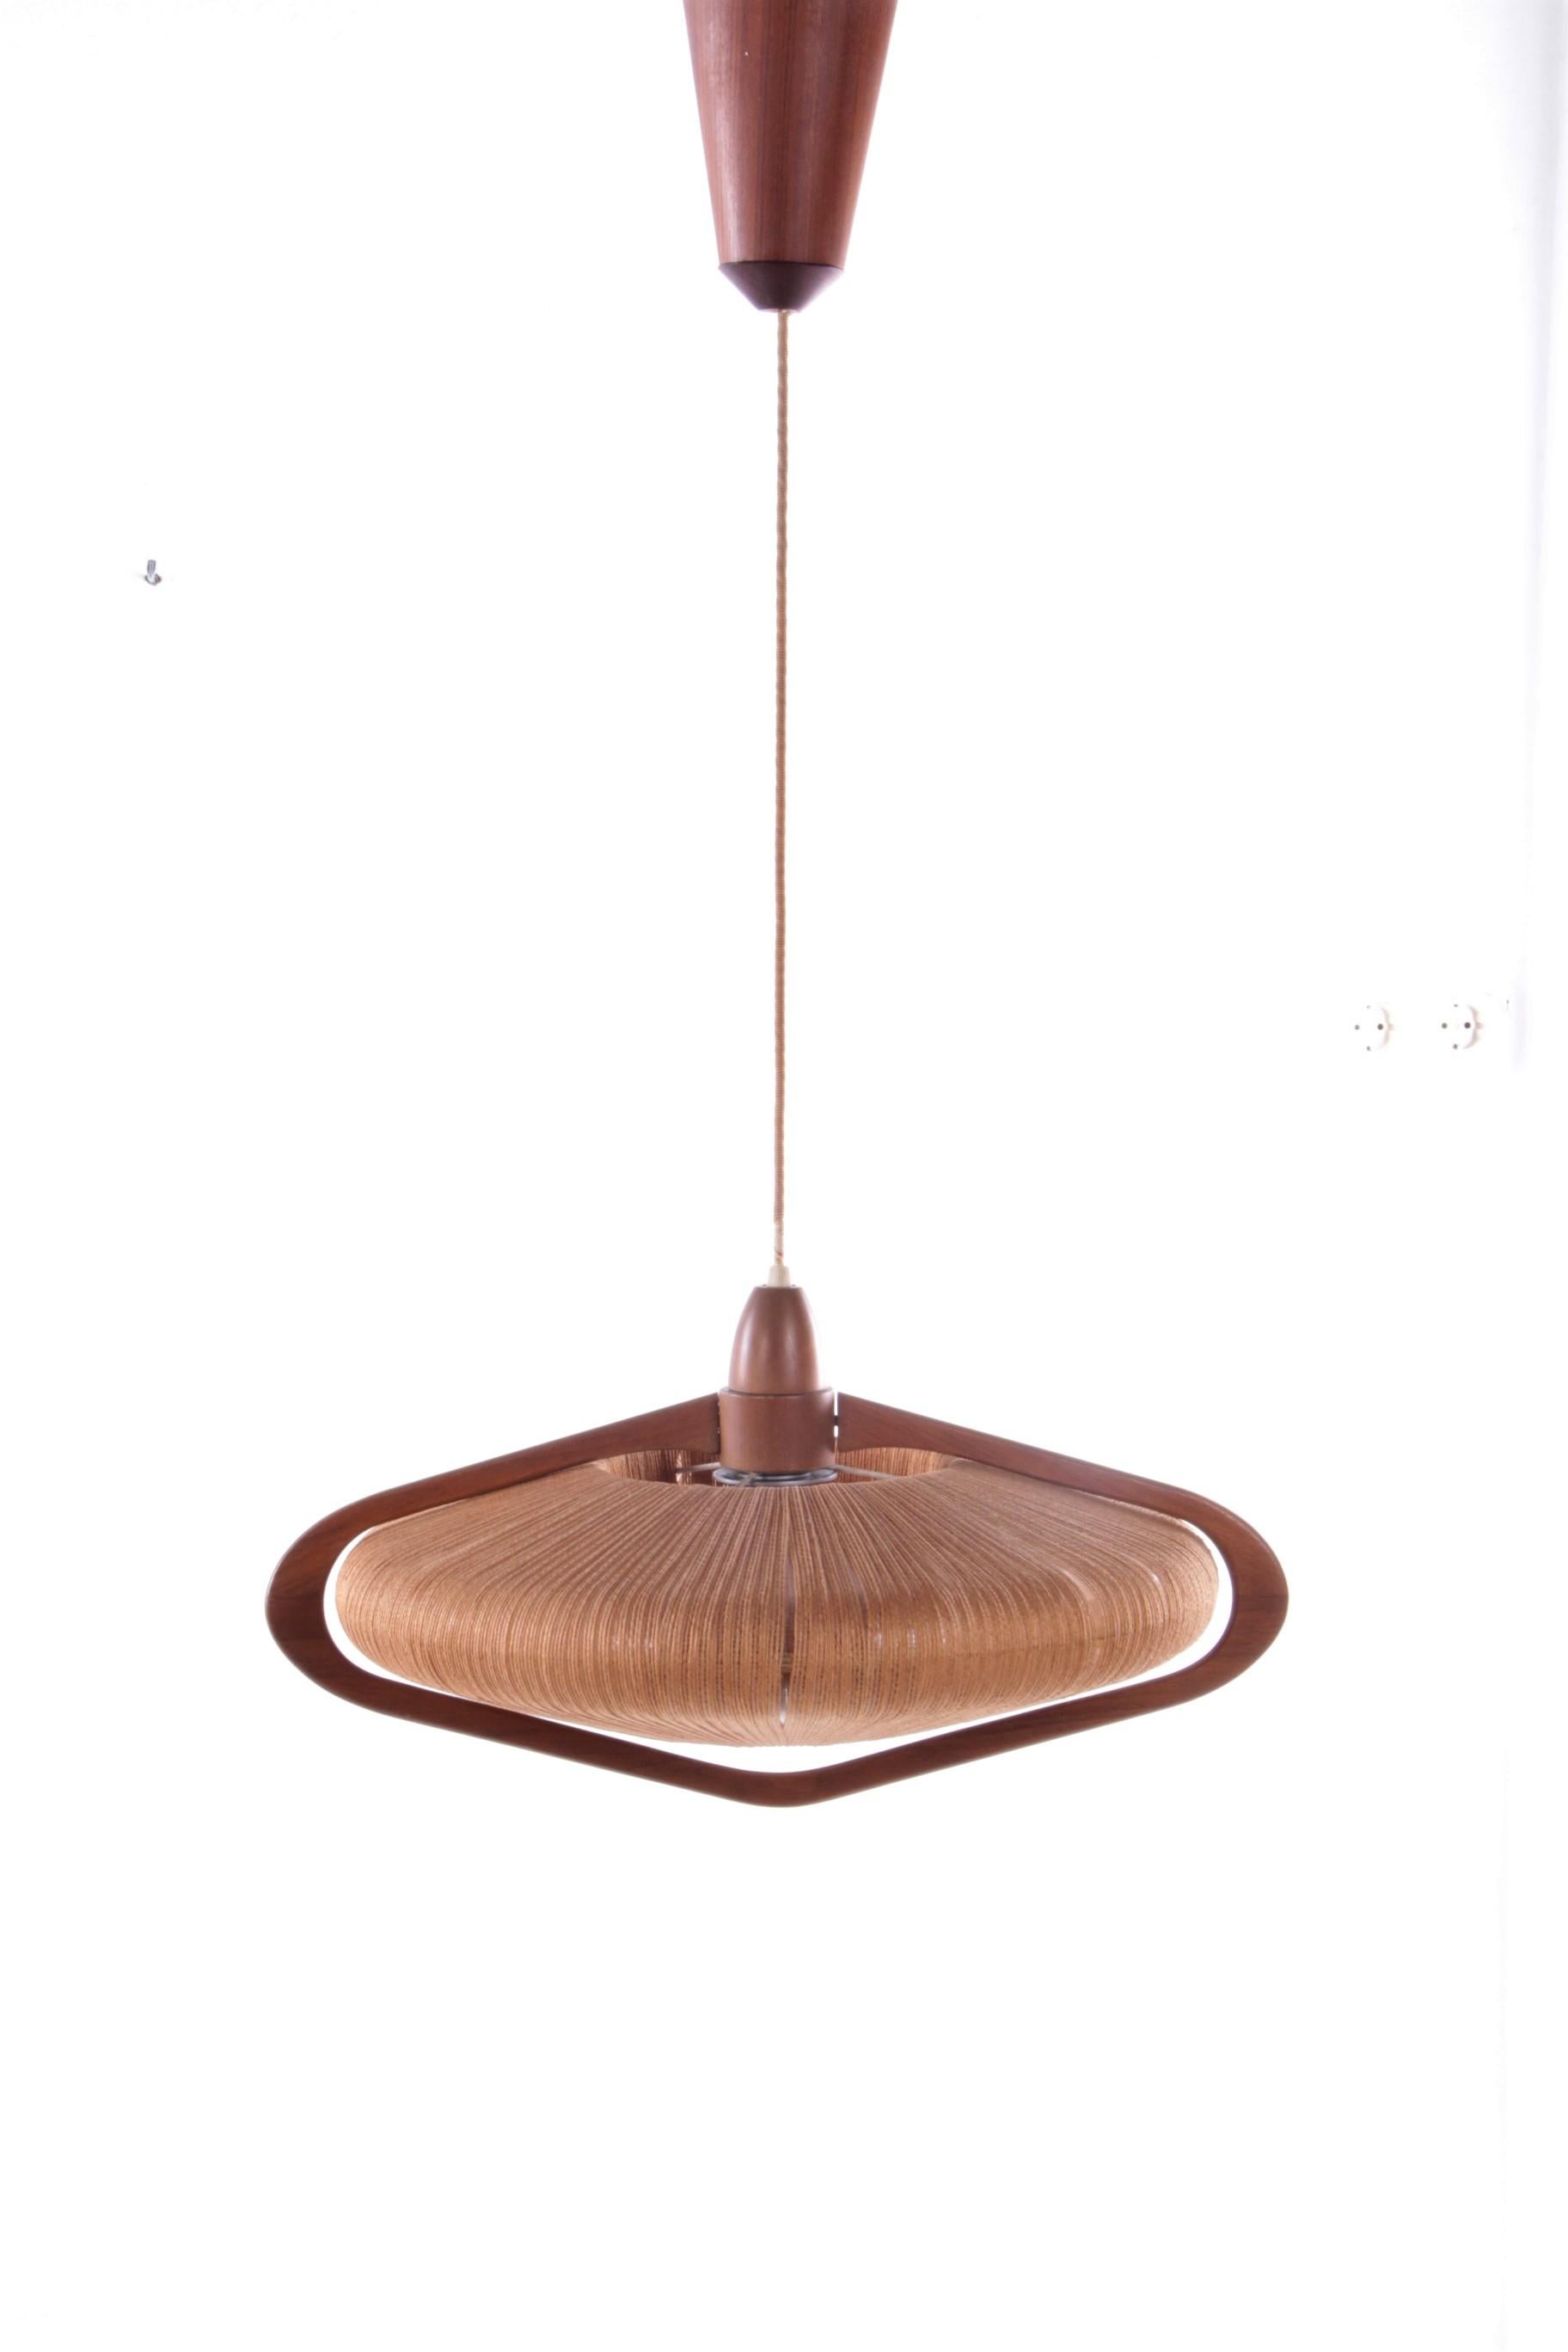 Very Rare Temde Leuchten Model UFO 1960, Switzerland.


Ceiling lamp and hanging lamp by Temde, rare UFO model and a cord screen.

The lamp emits a pleasant and glare-free light through the beautiful sissal.

It has an E27 fitting and the